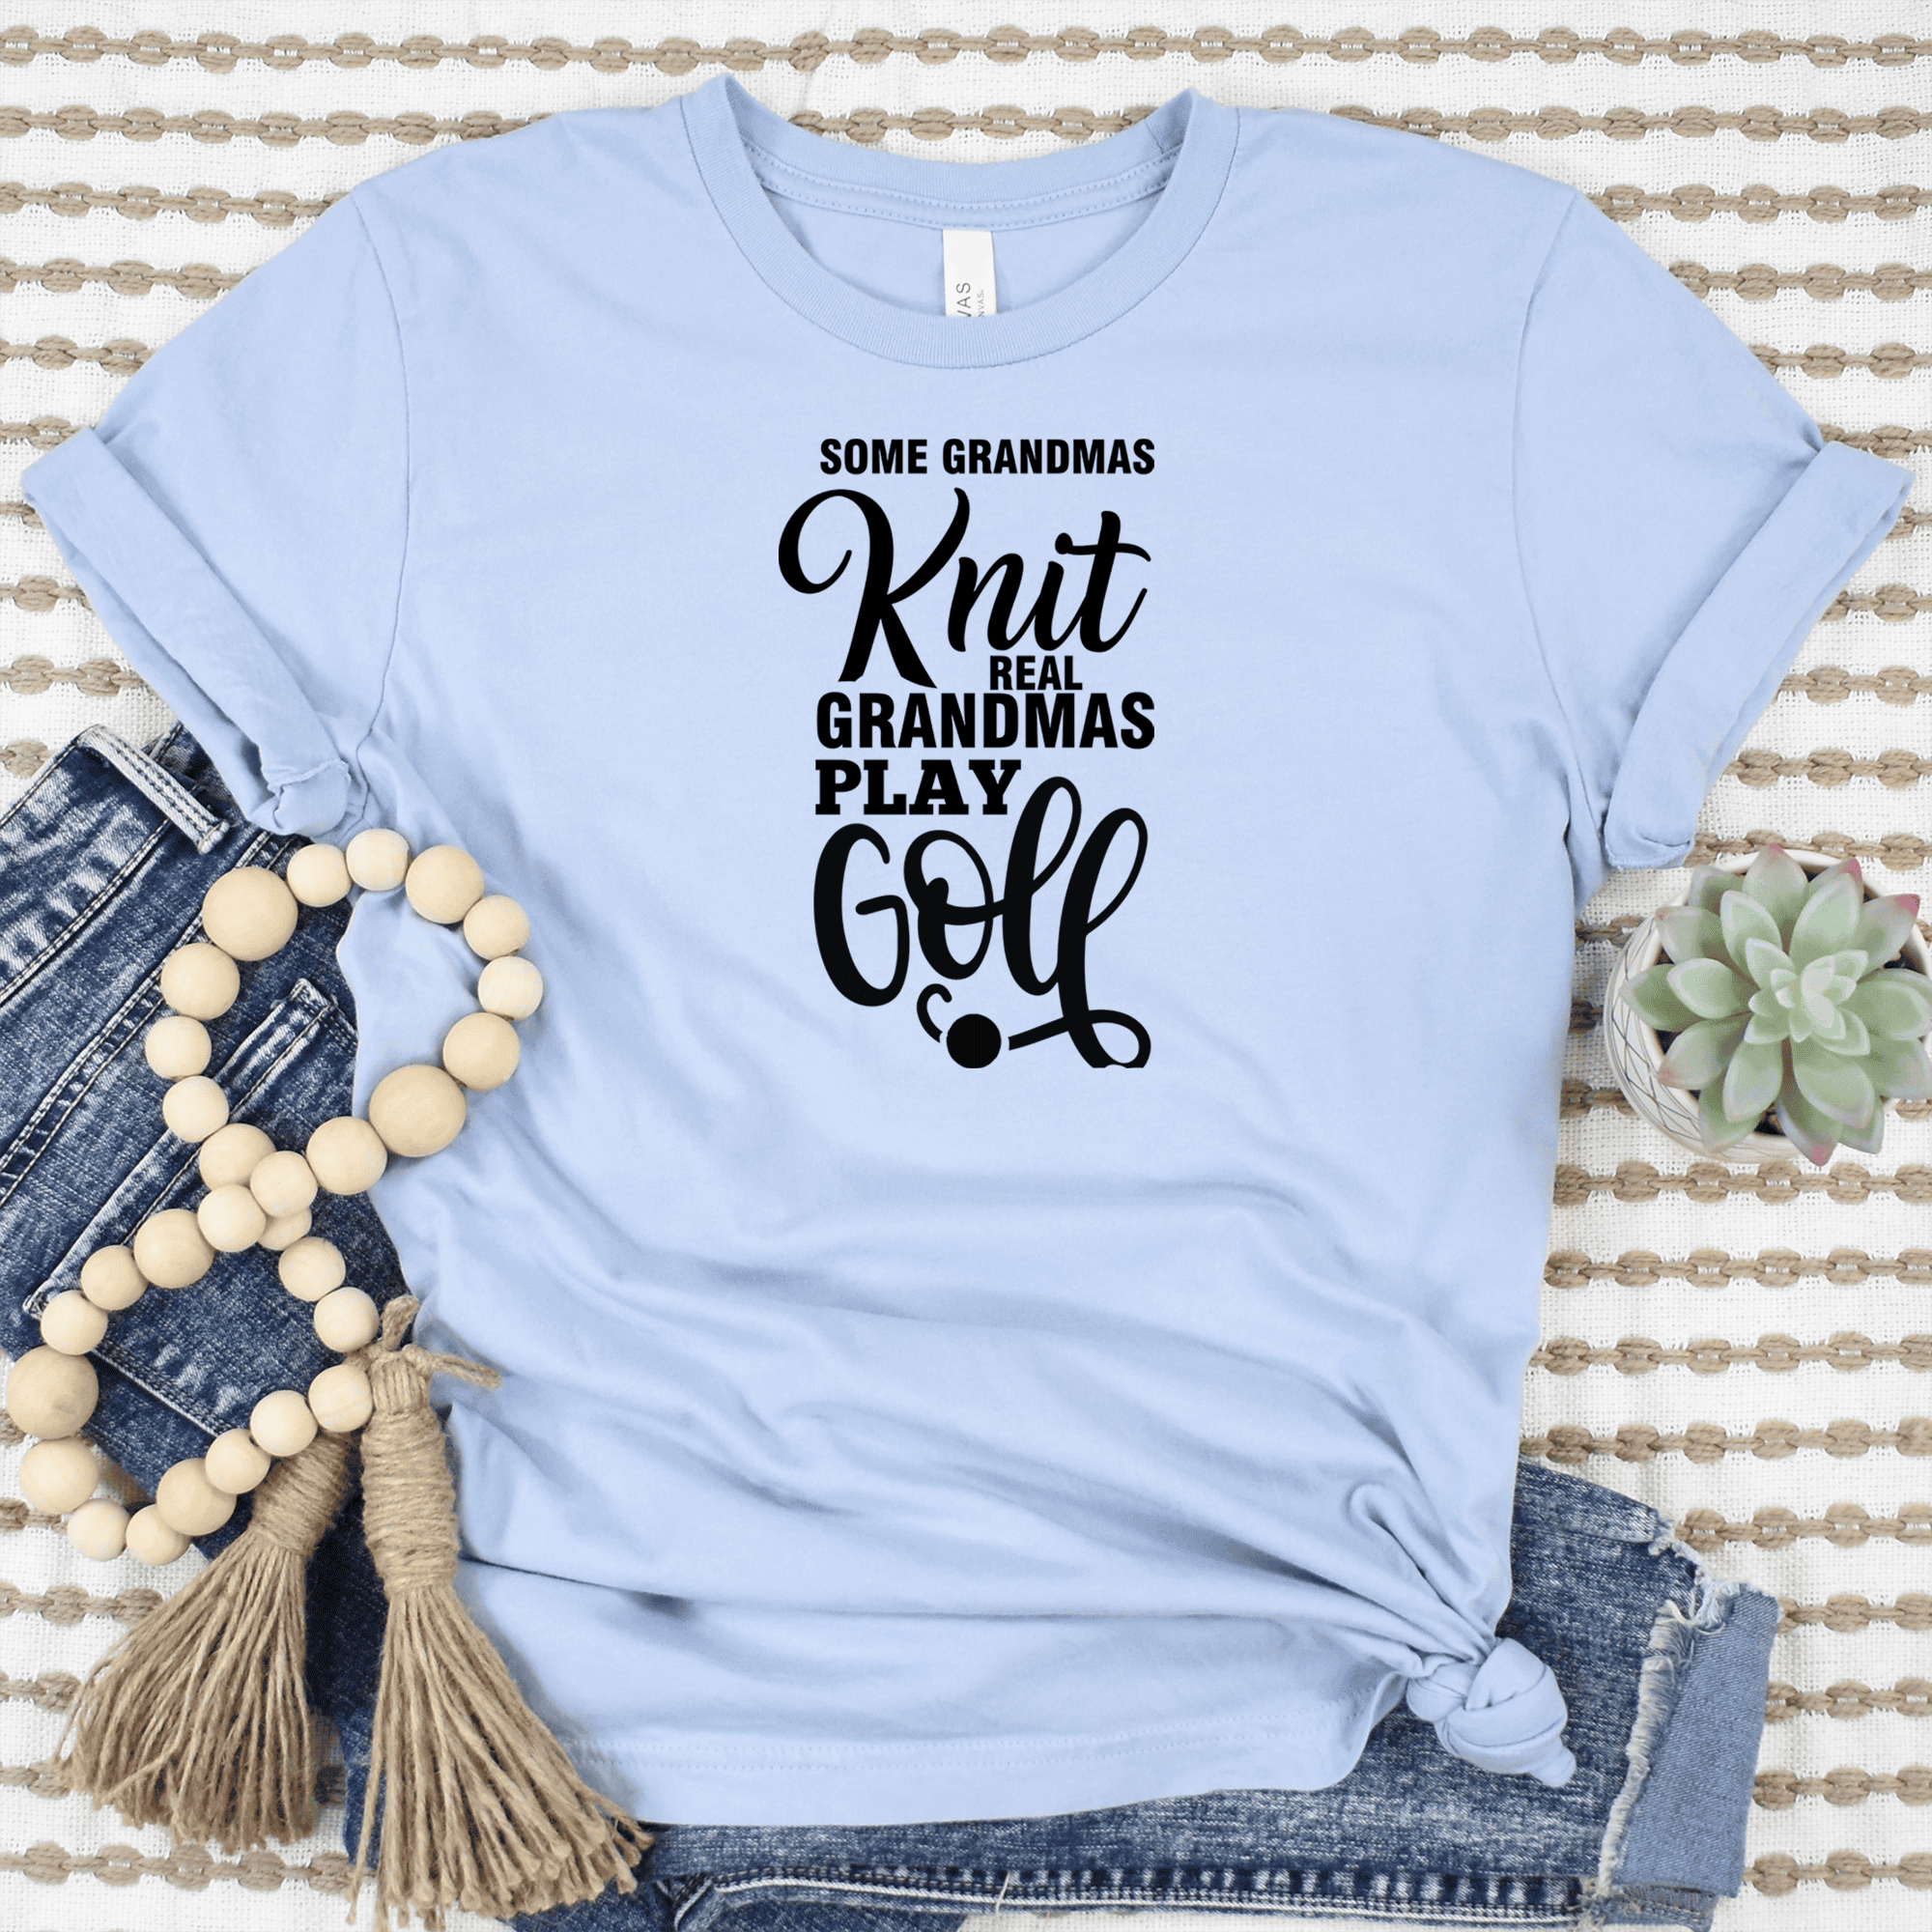 Womens Light Blue T Shirt with Real-Ladies-Golf design